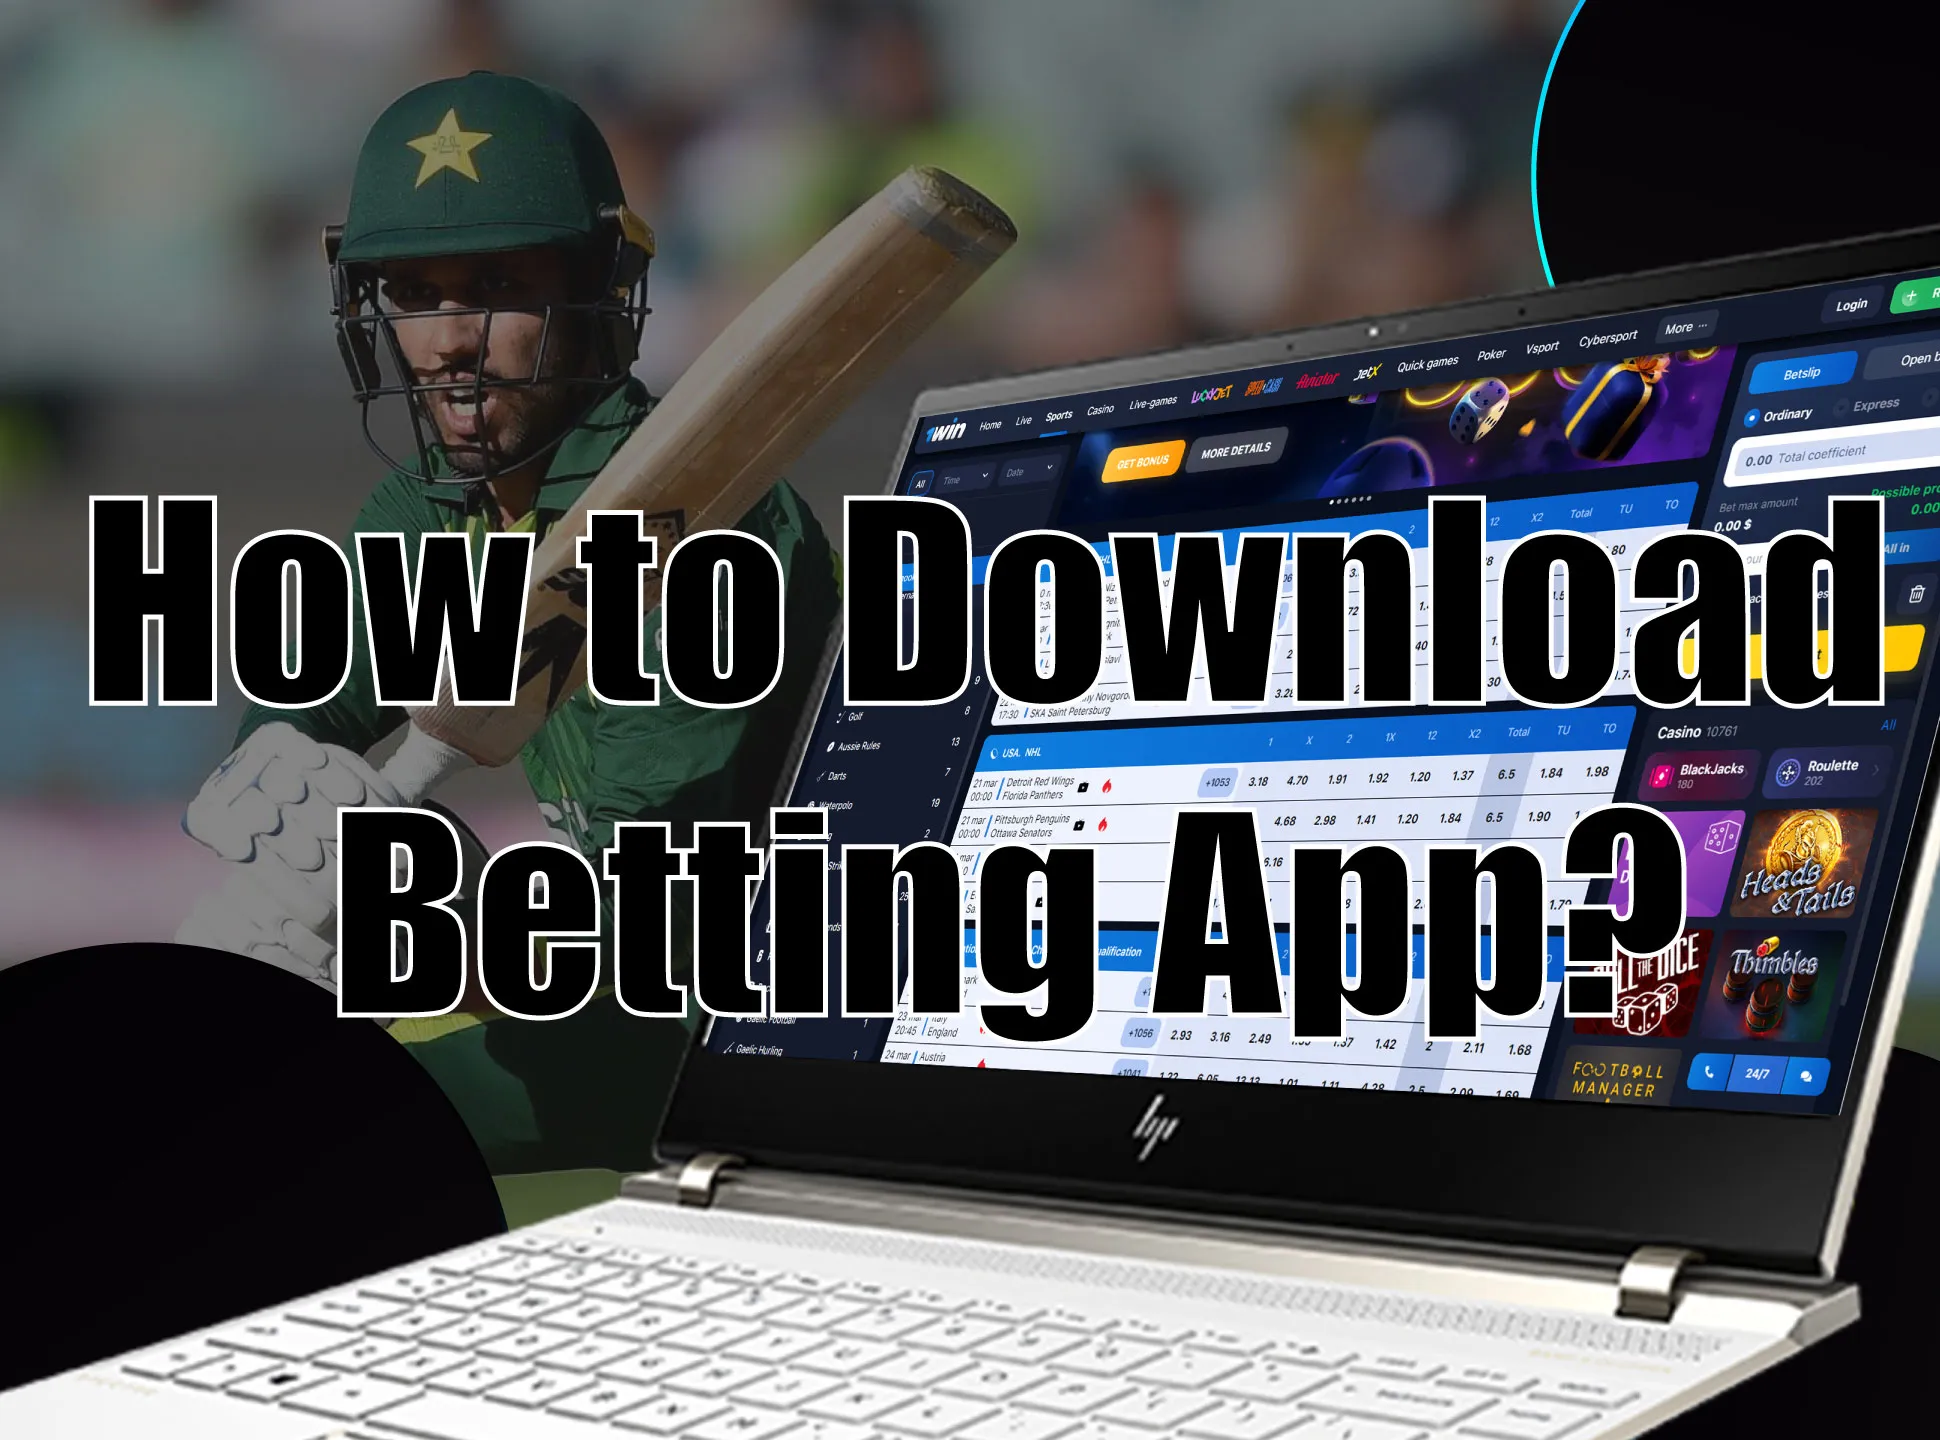 Usually, you can download a betting app from the official website of a bookmaker.